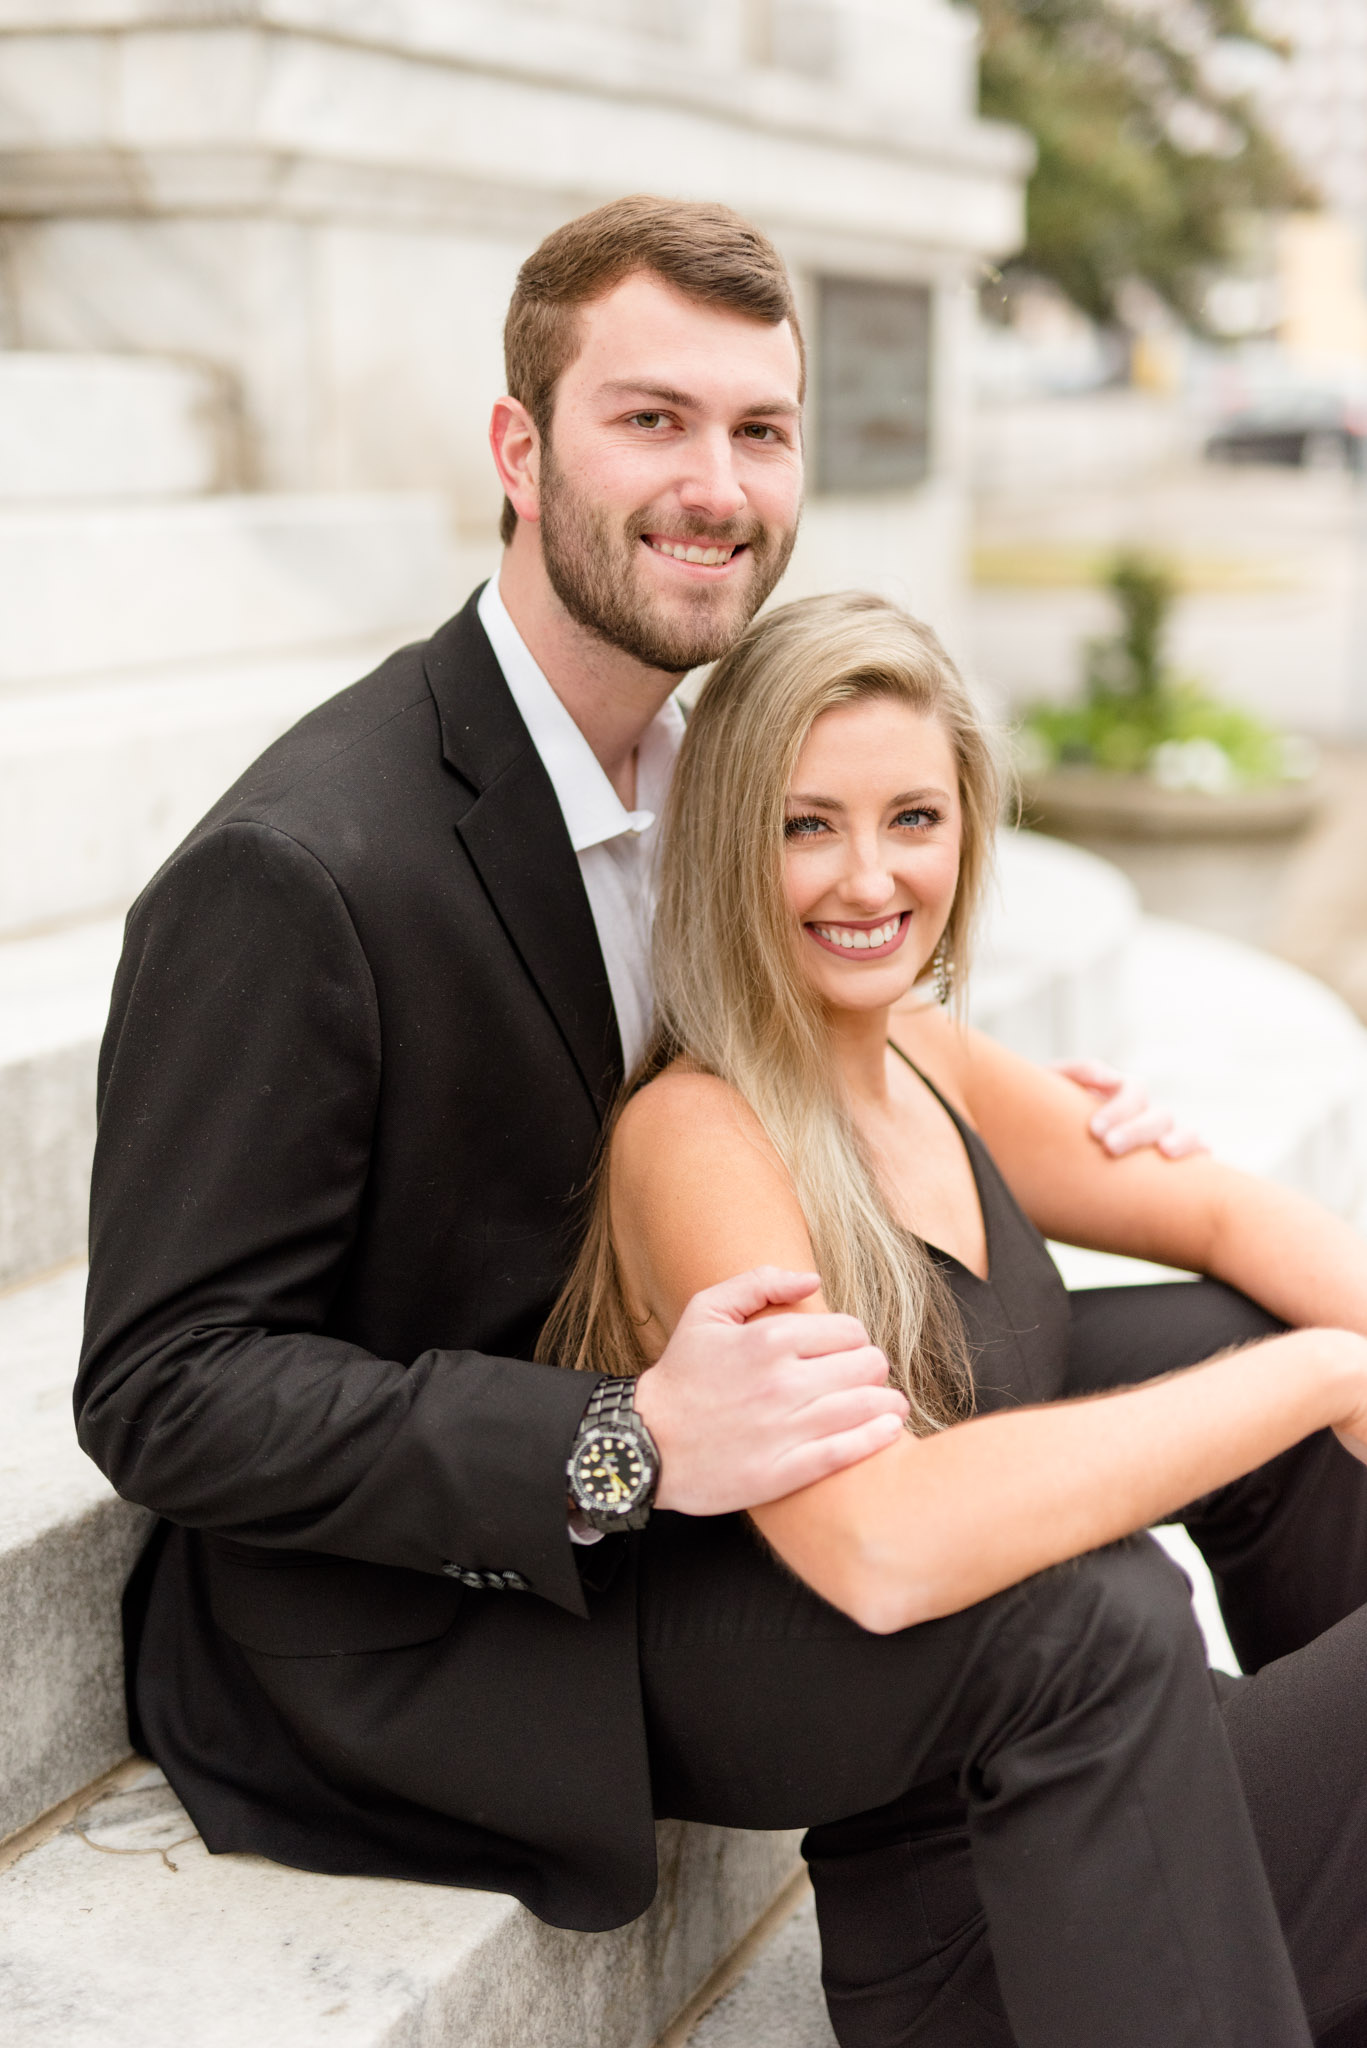 Couple sits on stairs and smiles at camera.